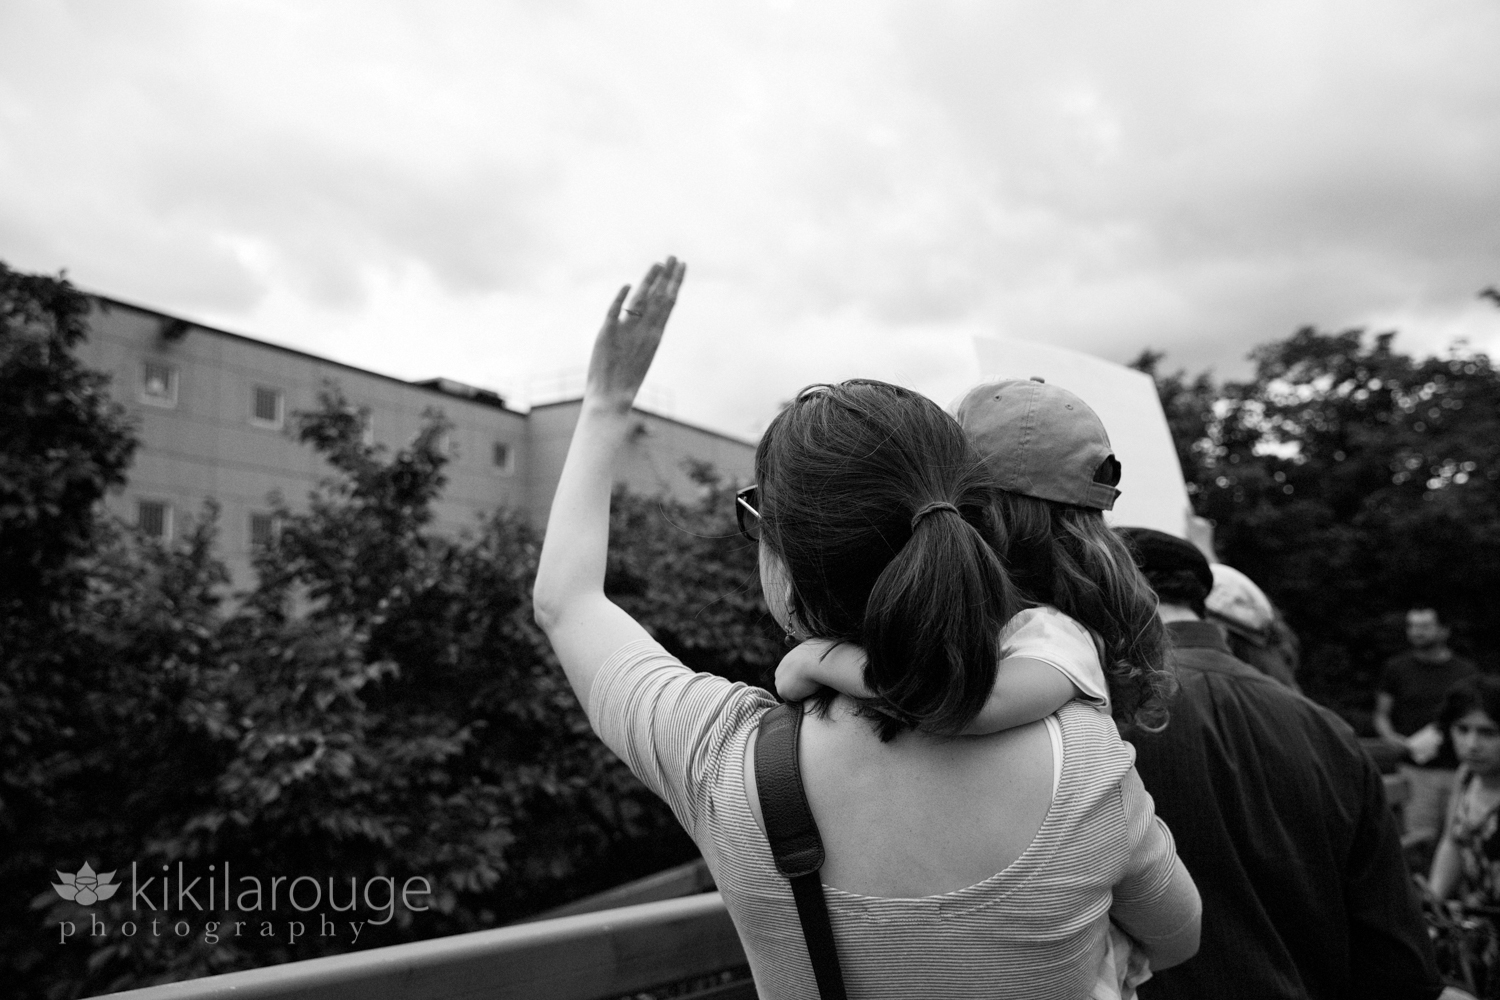 Woman with her young daughter waving at ICE detainees in Boston